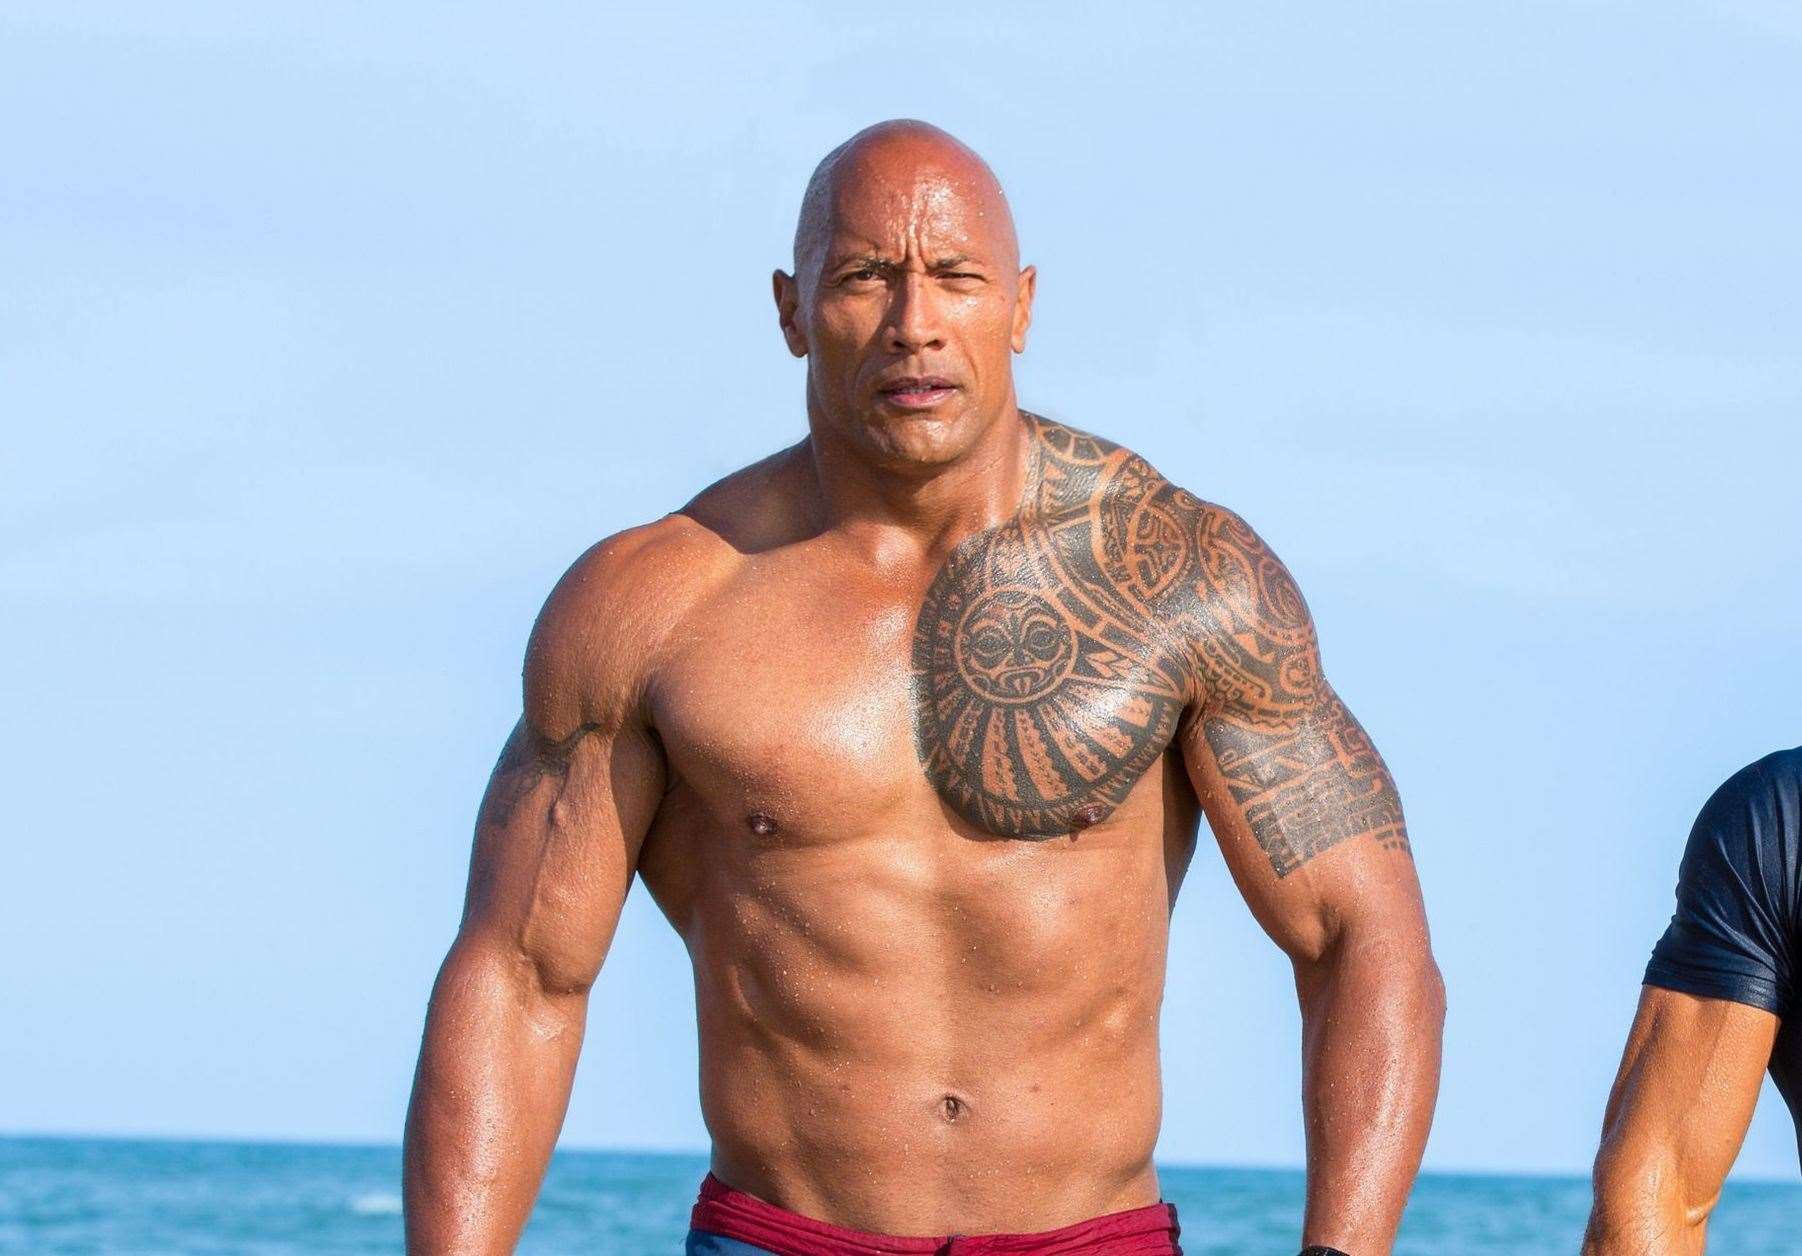 Dwayne Johnson (pictured here in Baywatch) is the subject of question No.6 Picture: Paramount